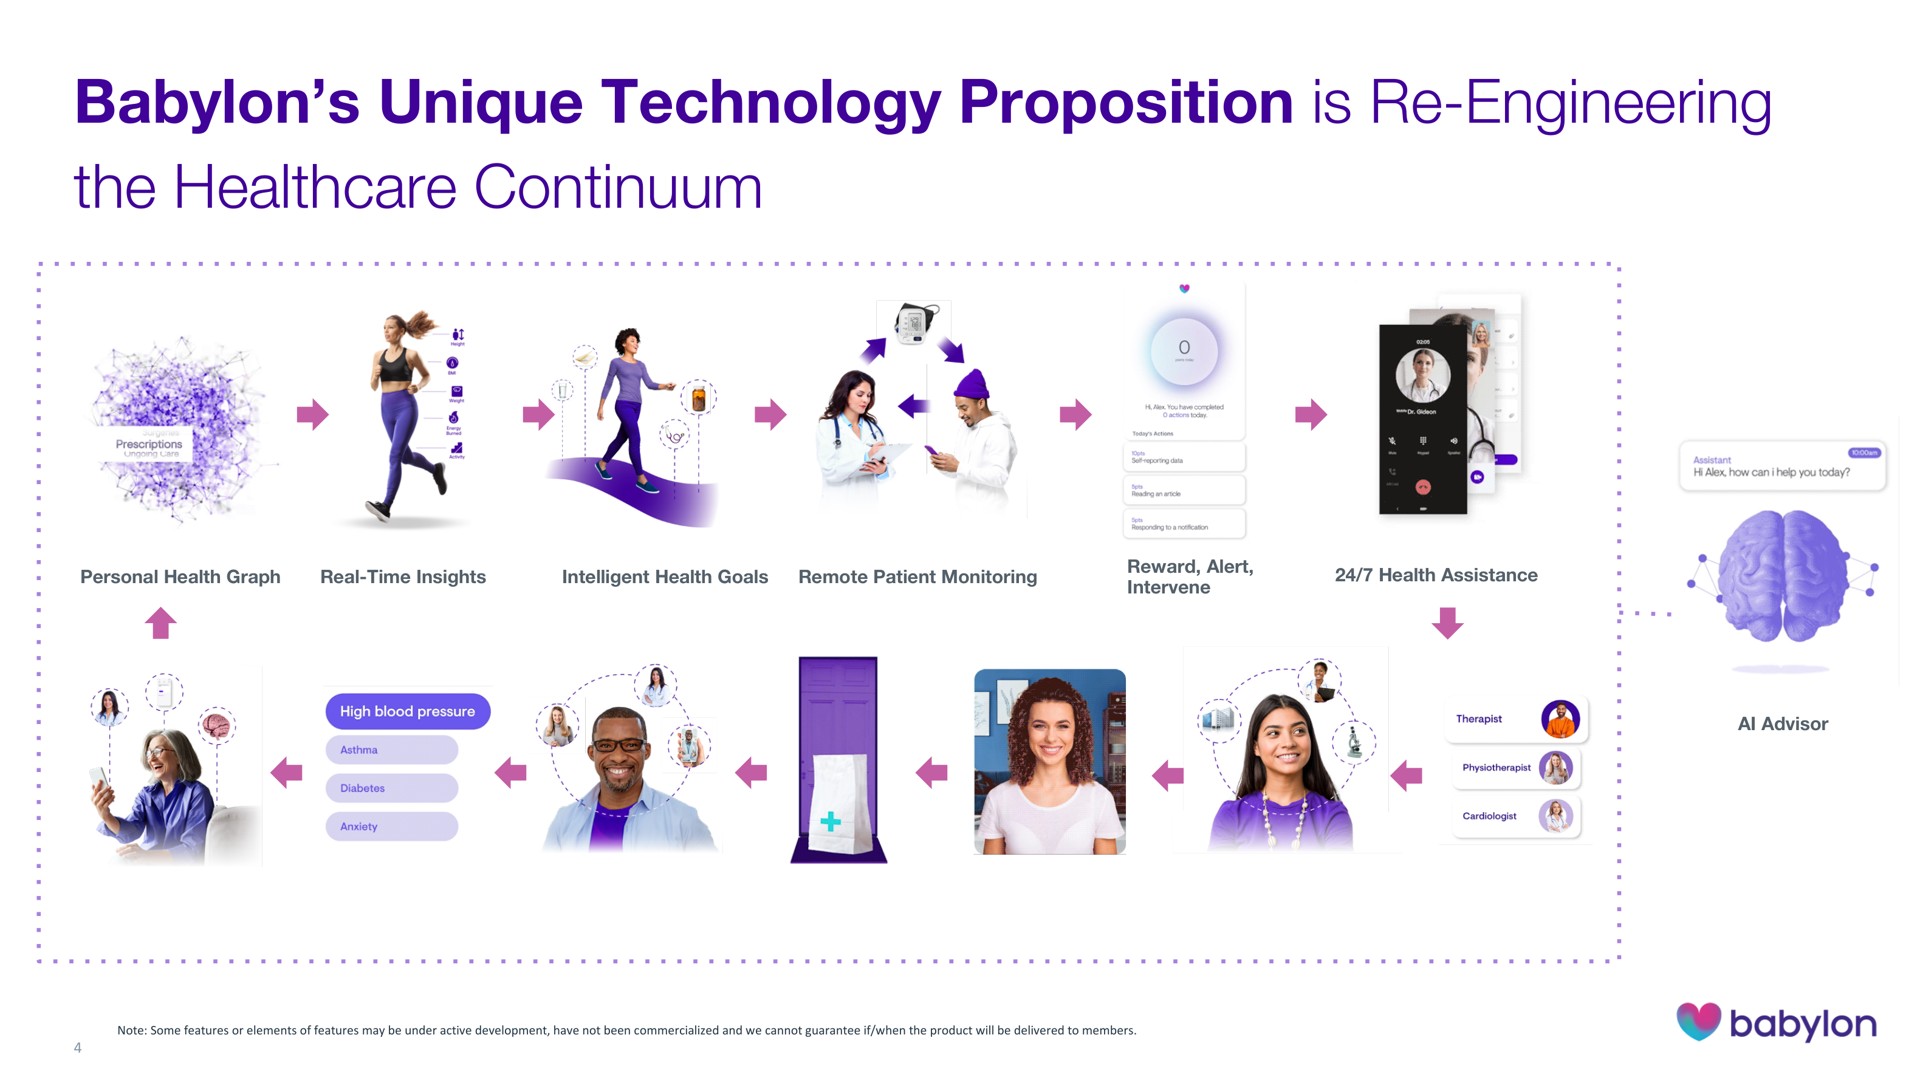 unique technology proposition is engineering the continuum | Babylon